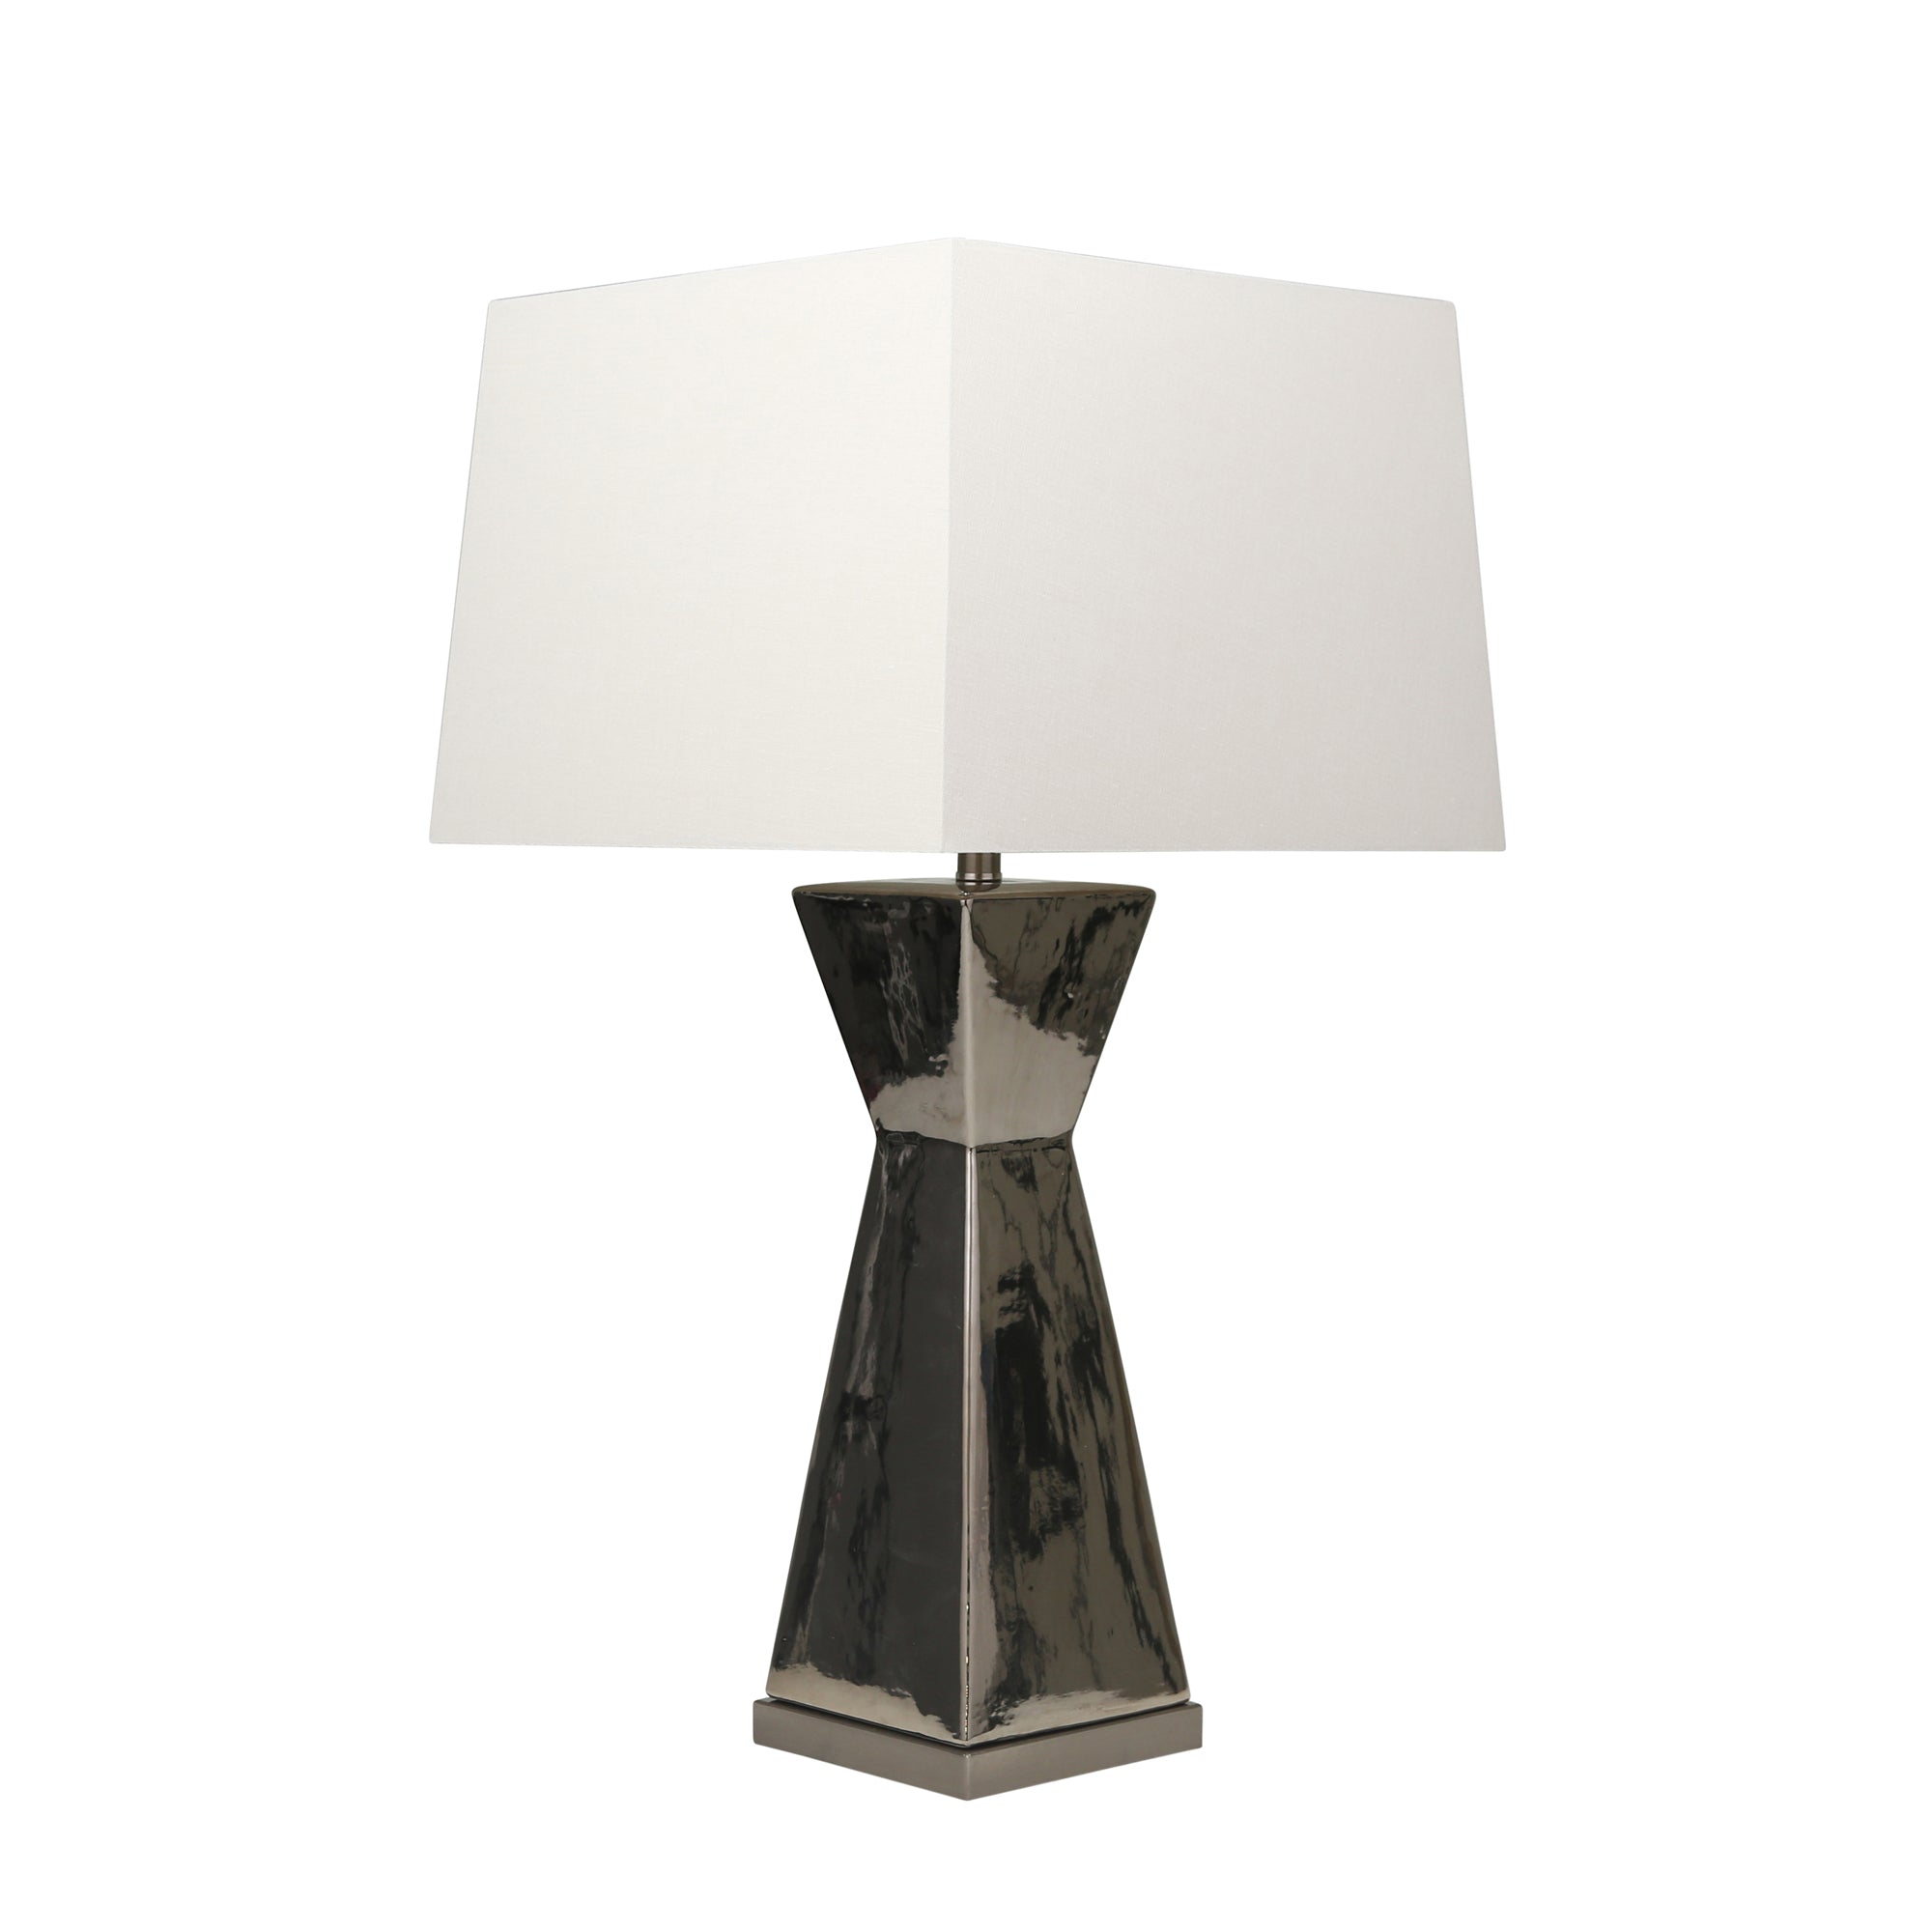 Hourglass Table Lamp - Silver